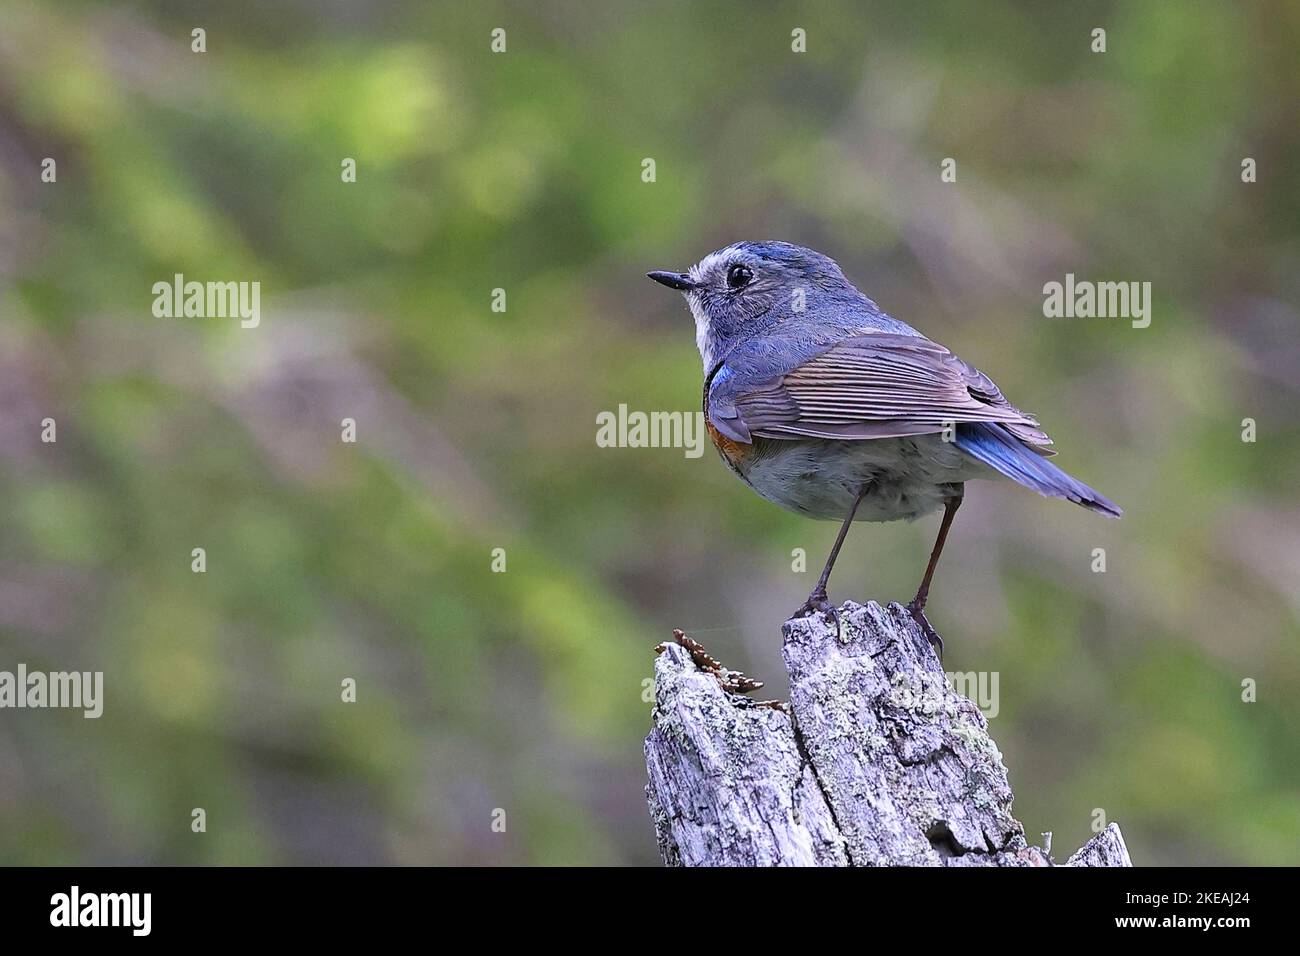 Red-flanked bluetail, Orange-flanked Bush Robin (Tarsiger cyanurus, Luscinia cyanura), male perched on a tree snag in mountain forest, rear view, Stock Photo